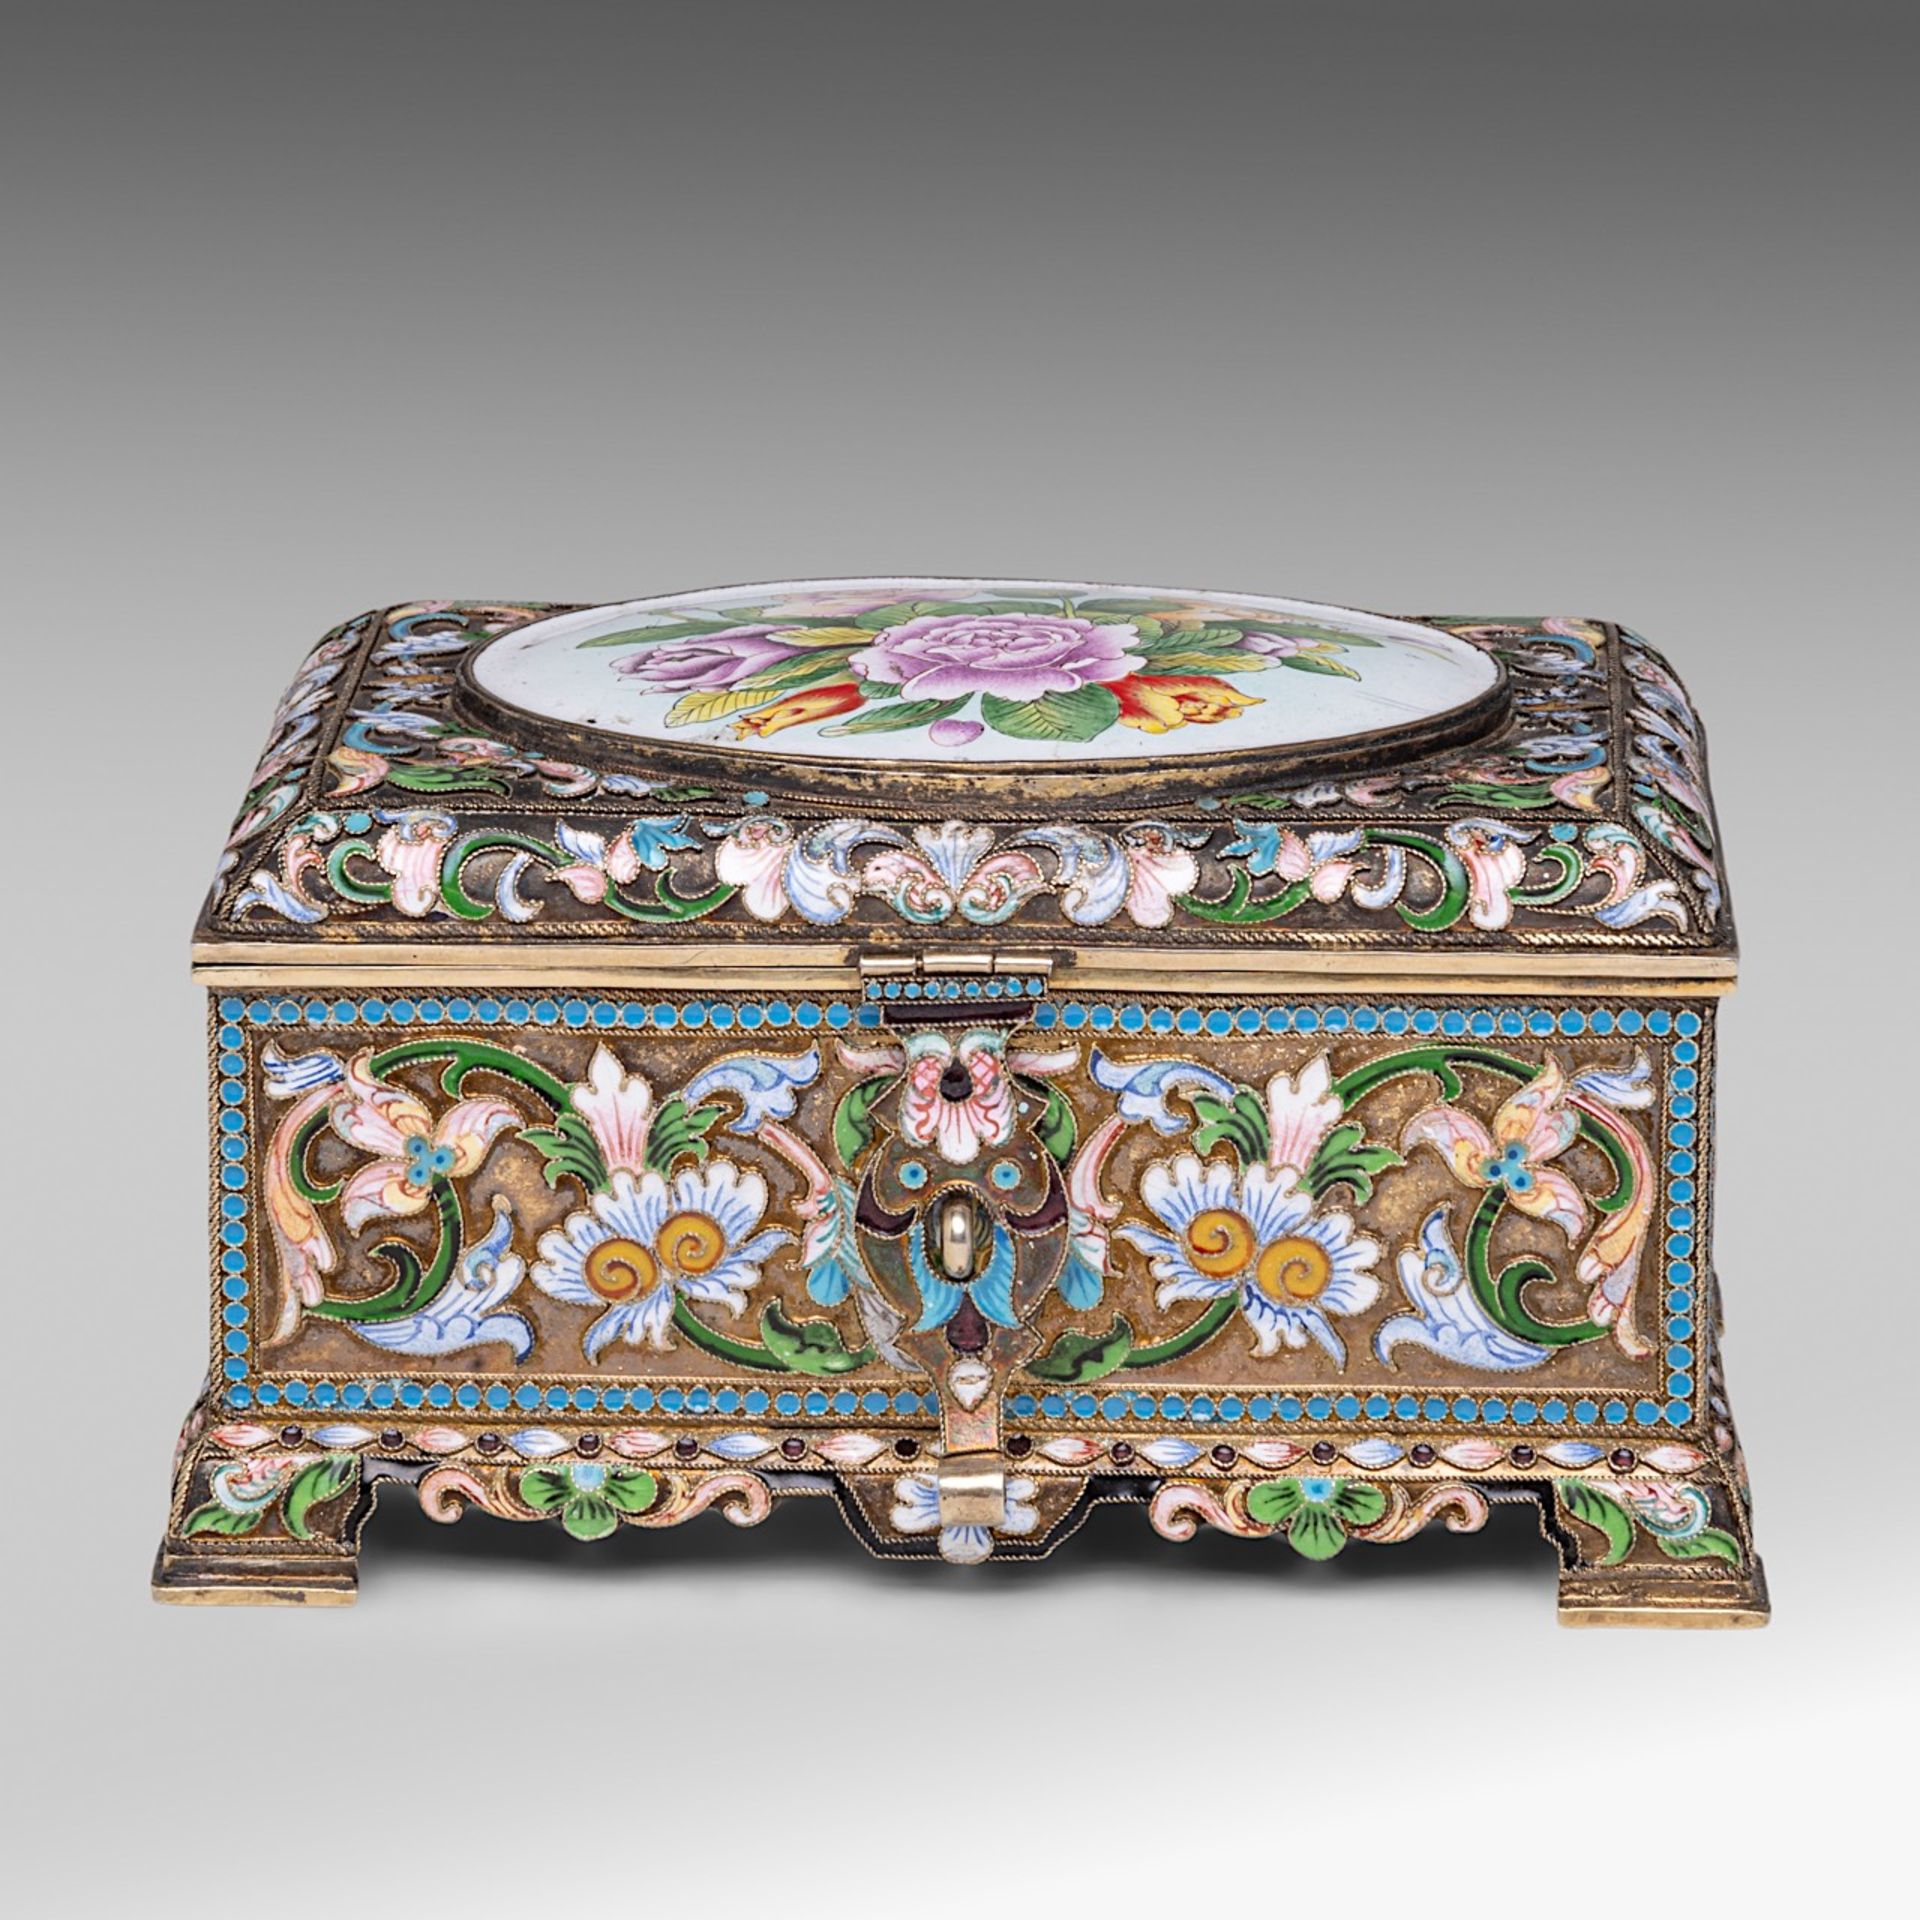 A Russian silver and enamel floral decorated jewellery box, hallmarked 84 Zolotniki, H 8 - 15 - 10 c - Bild 2 aus 9